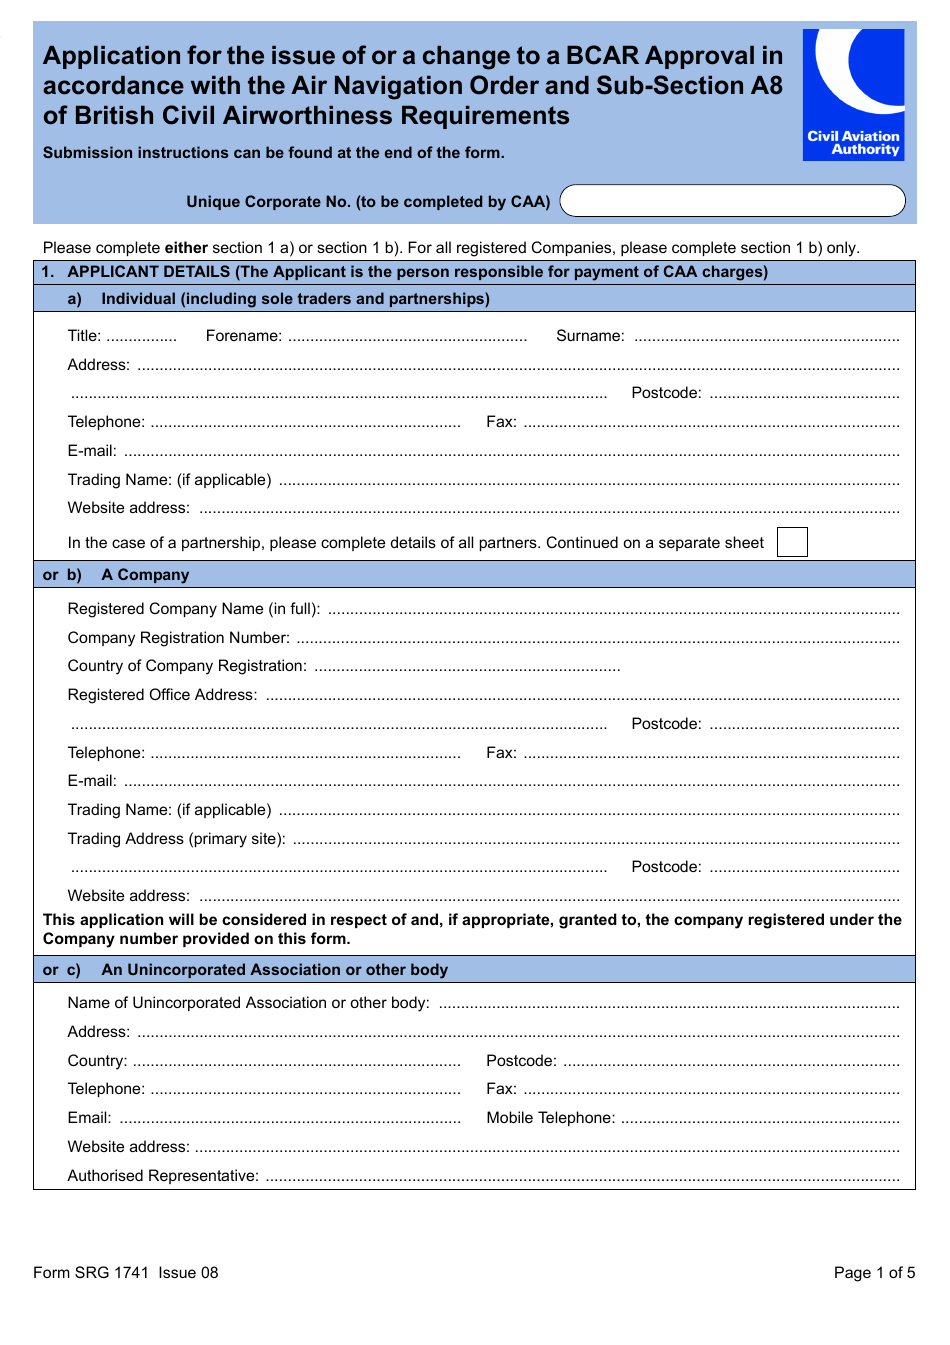 Form SRG1741 Application for the Issue of or a Change to a Bcar Approval in Accordance With the Air Navigation Order and Sub-section A8 of British Civil Airworthiness Requirements - United Kingdom, Page 1